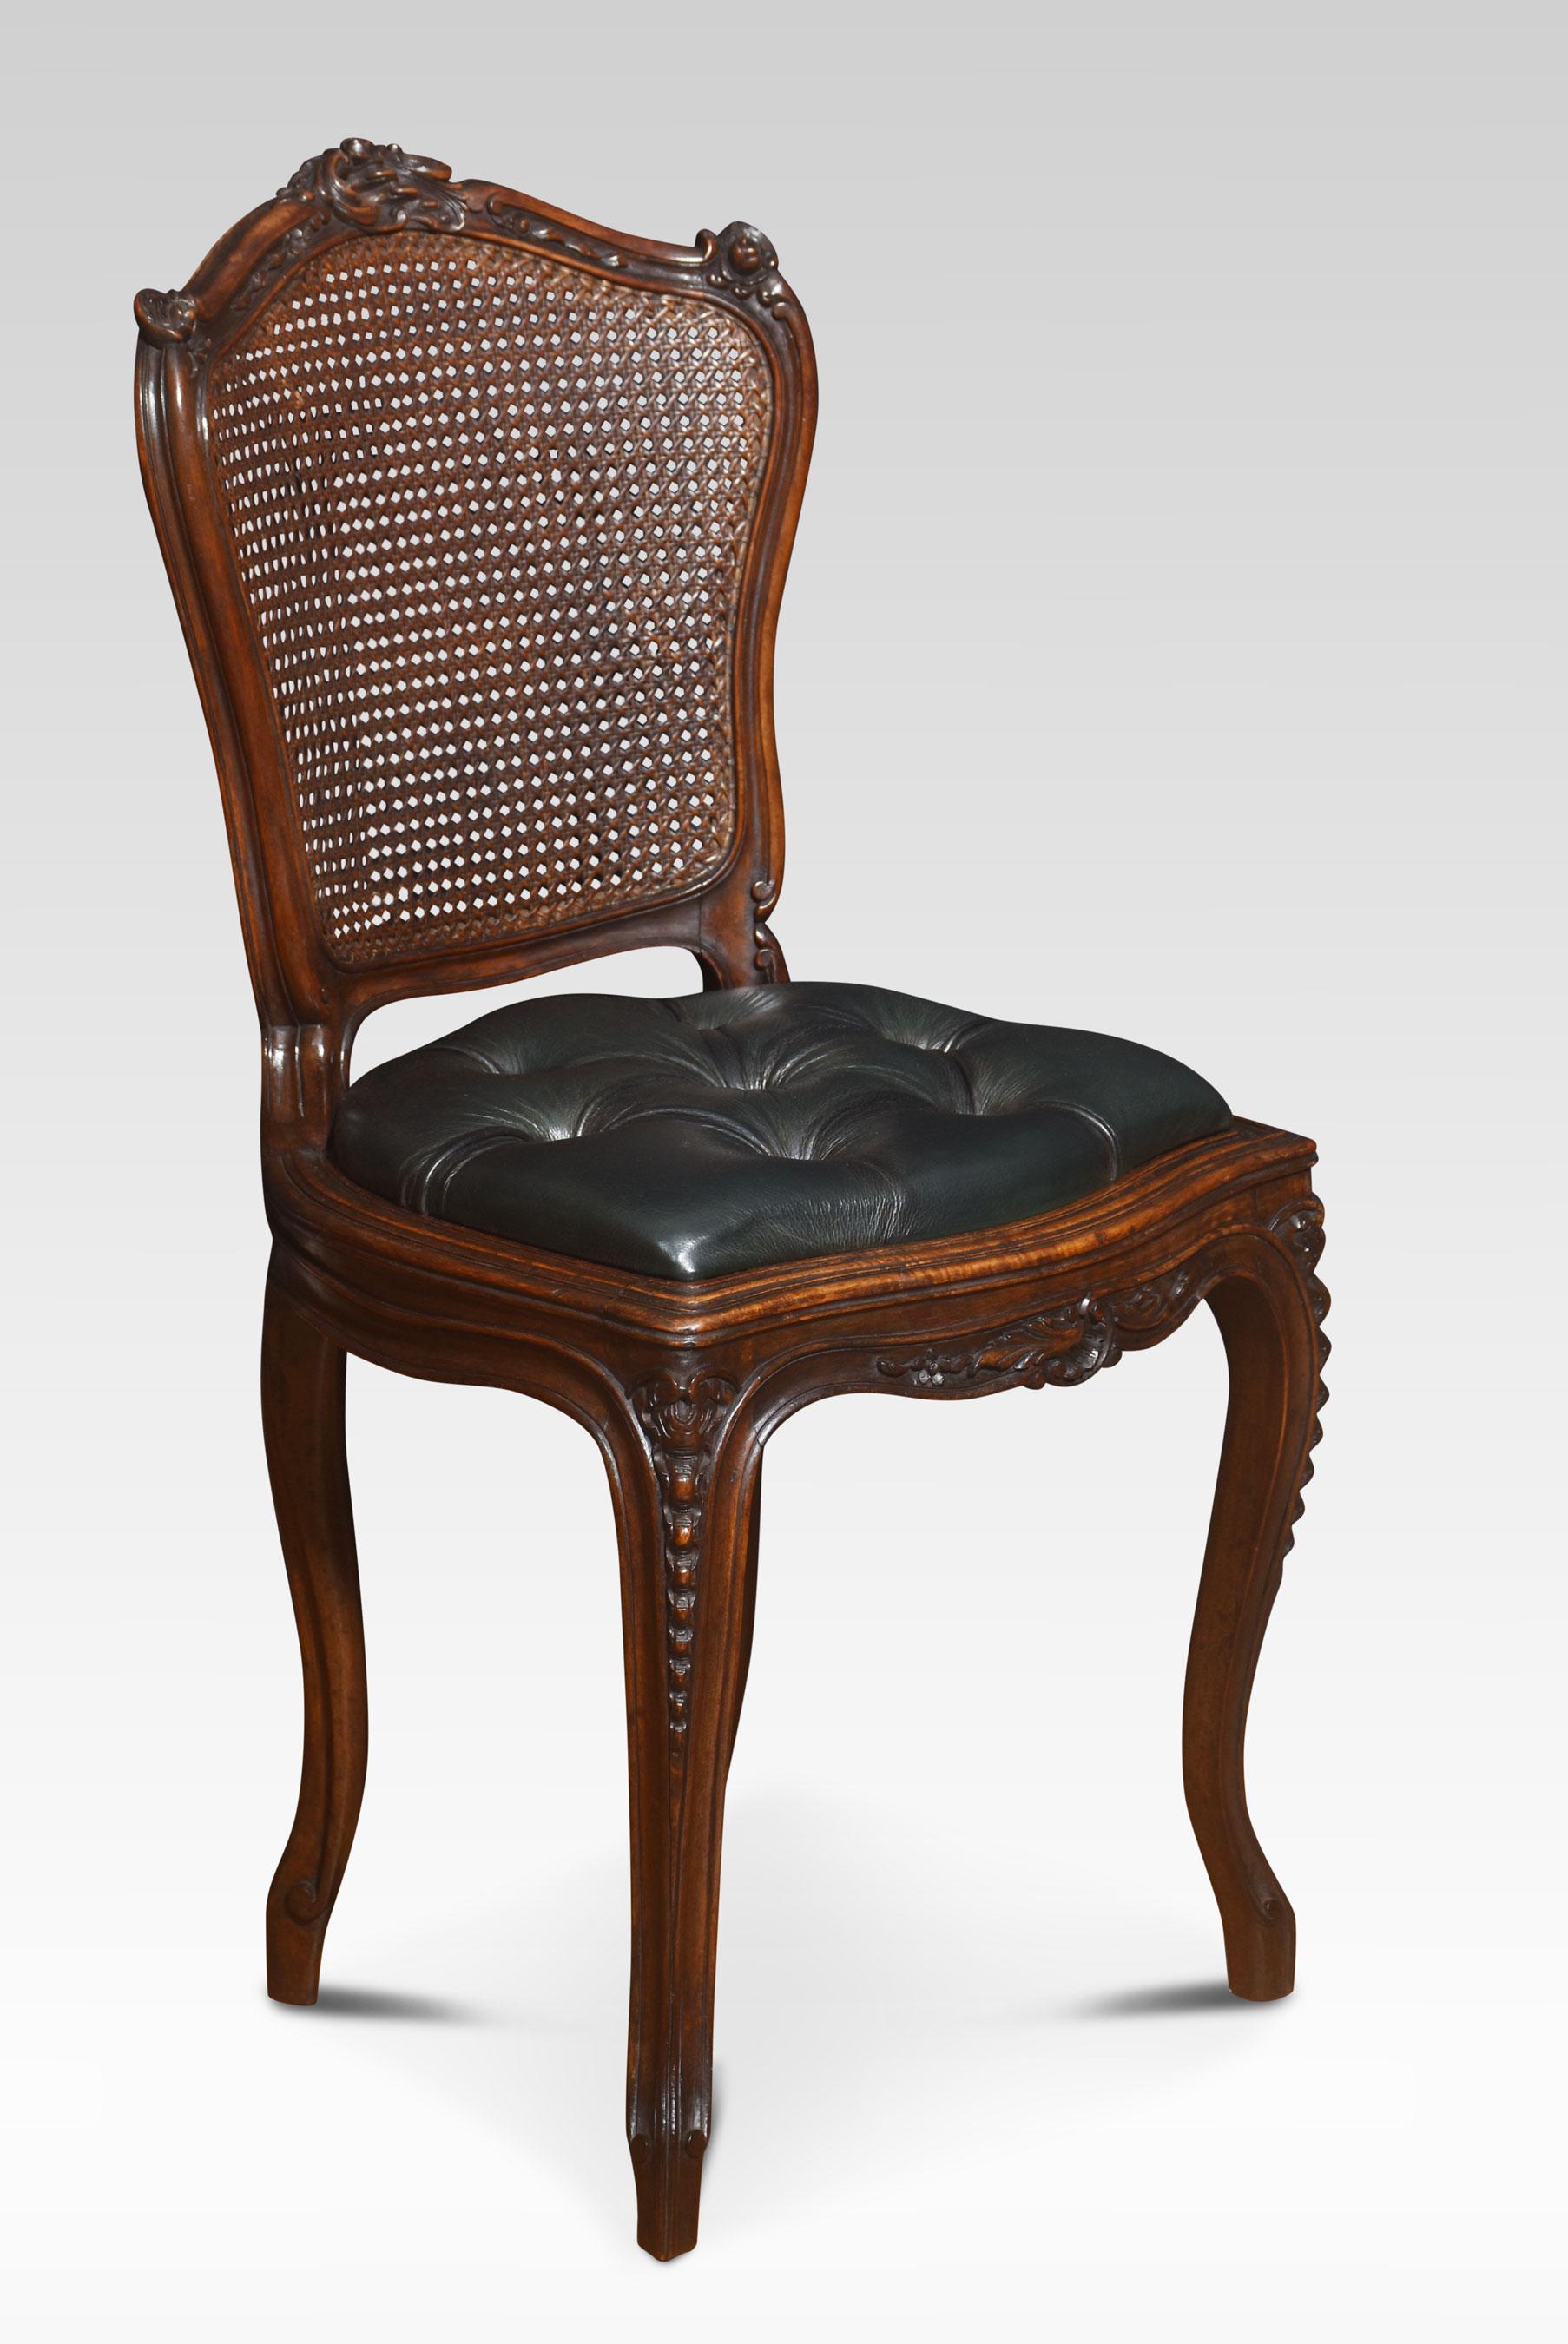 Pair of French Louis XV side chairs, the carved rail in the typical manner of the period, with detailed leaf motifs. to the canework back and deep buttoned leather seat. All raised up on four carved tapering cabriole legs
Dimensions
Height 34 Inches